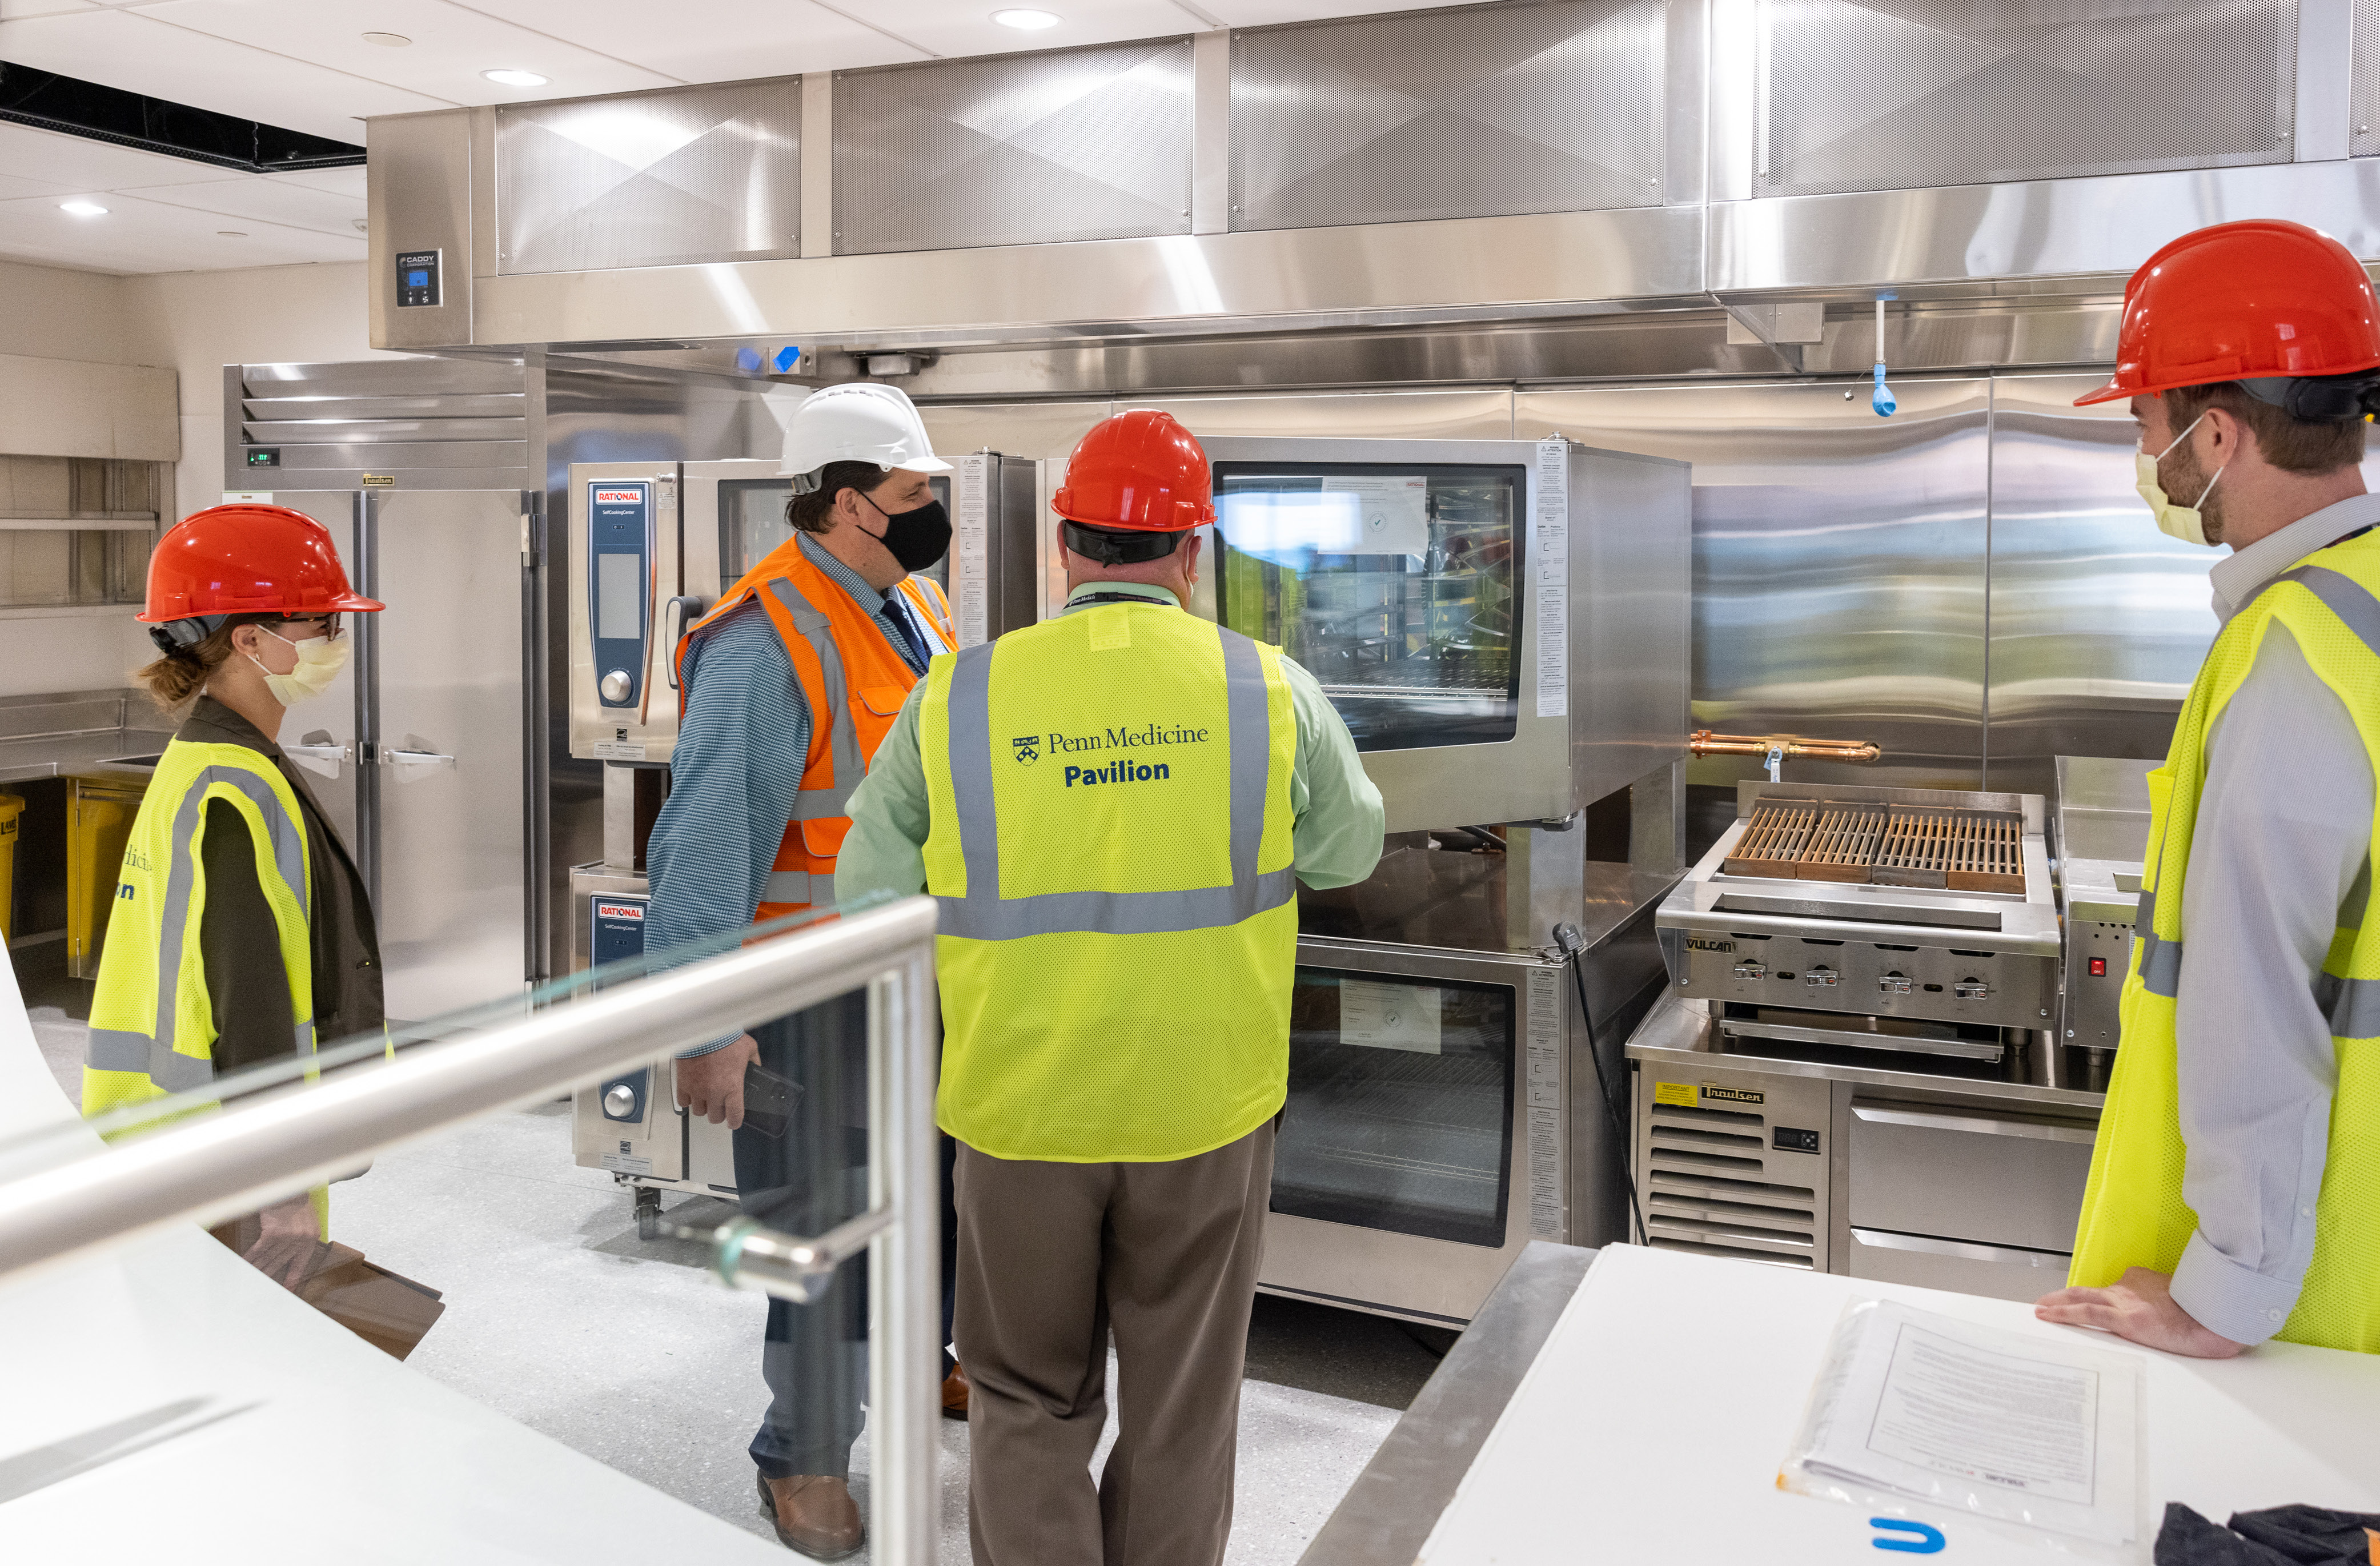 HUP Resident District Manager of Food and Nutrition Anthony Avalone, wearing the orange vest, and members of the Food Services management team inspect new equipment in the Pavilion servery prior to opening.